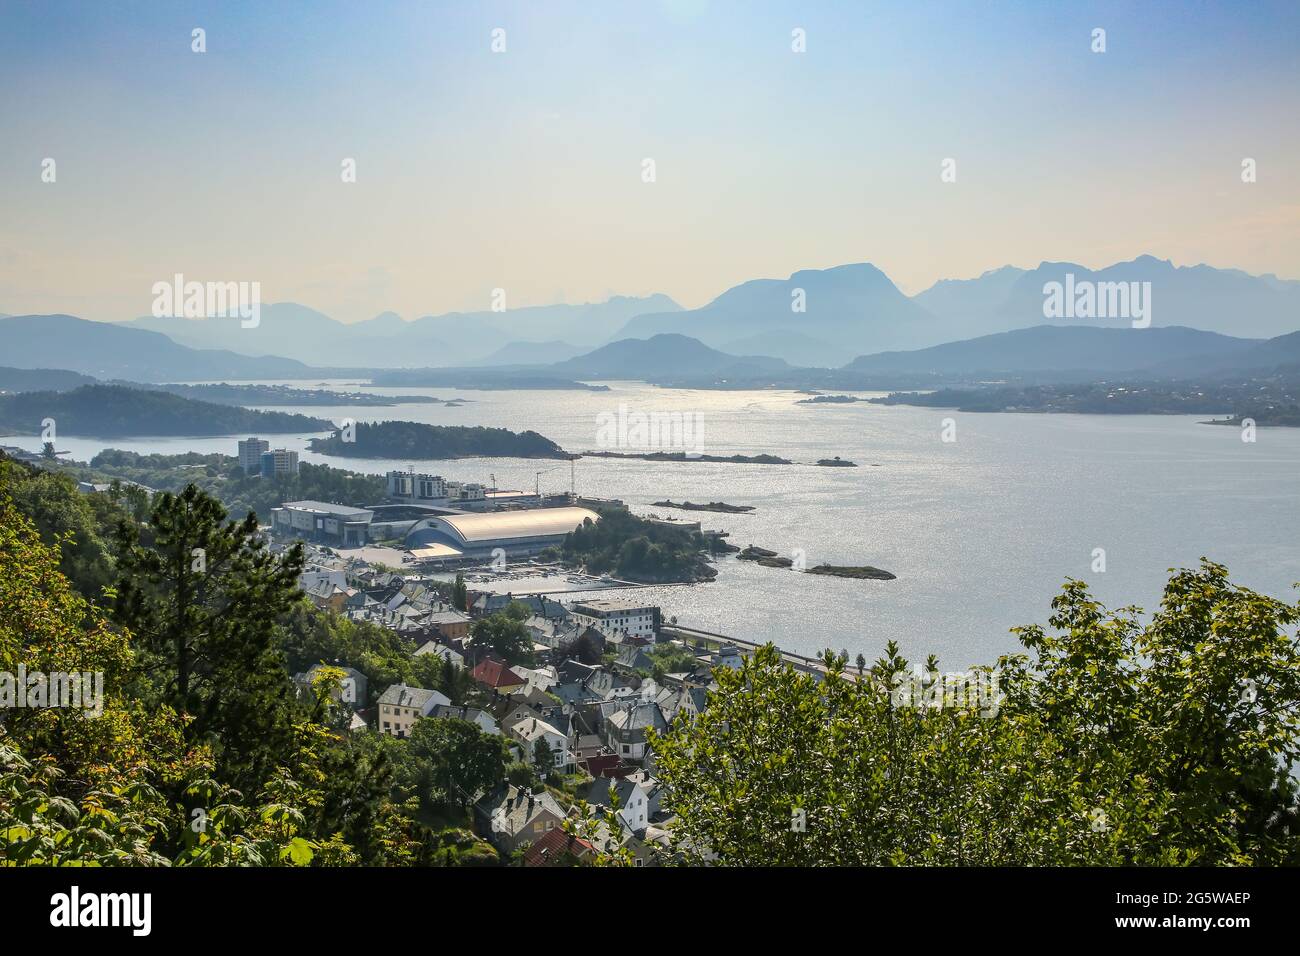 View of Alesund; Panoramic view of the archipelago, islands and fjords from the viewpoint Aksla, Alesund, Norway. Stock Photo